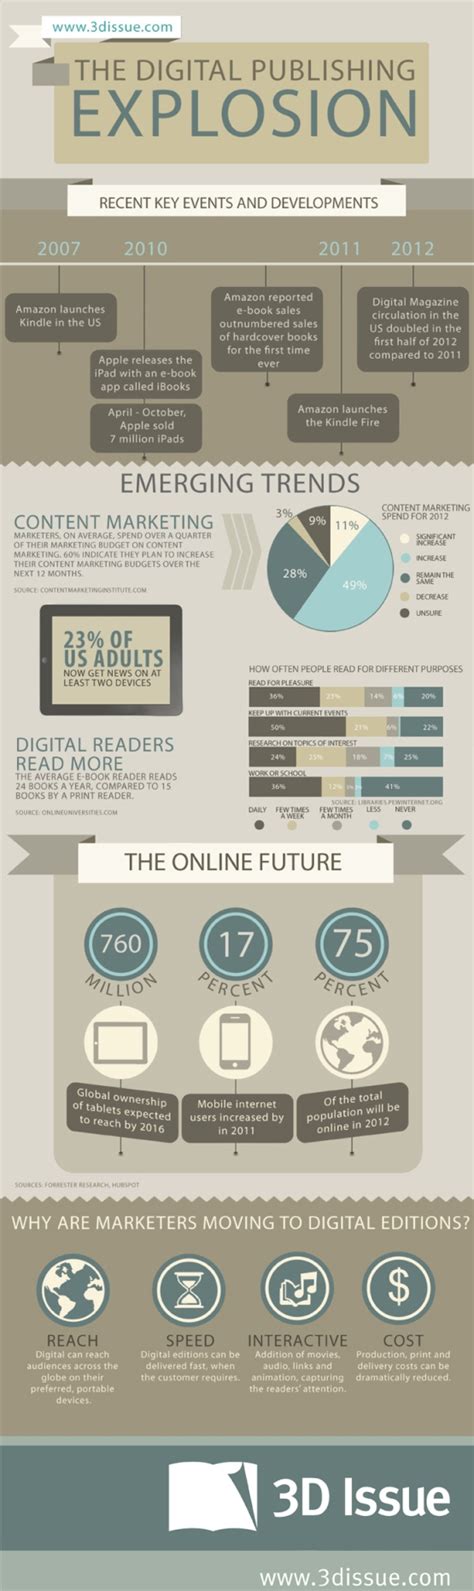 The Digital Publishing Explosion Infographic